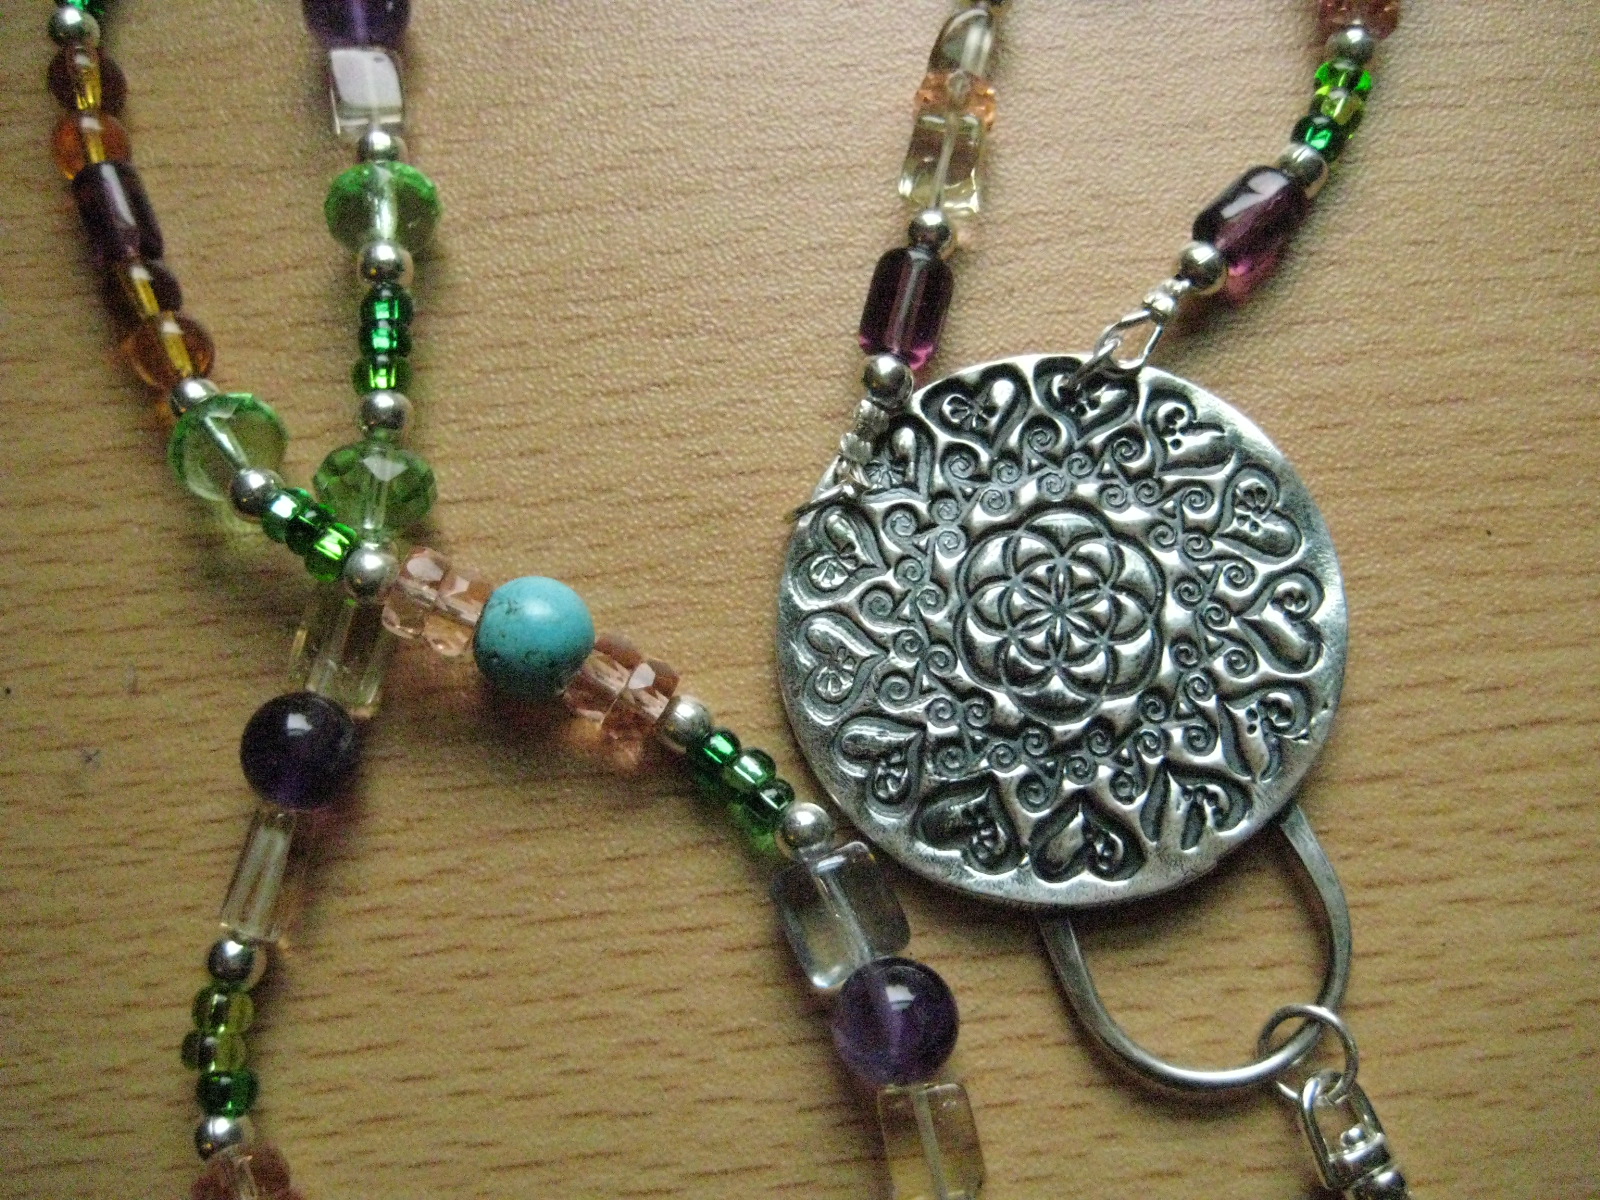 a silver medallion with a flower and some other beads